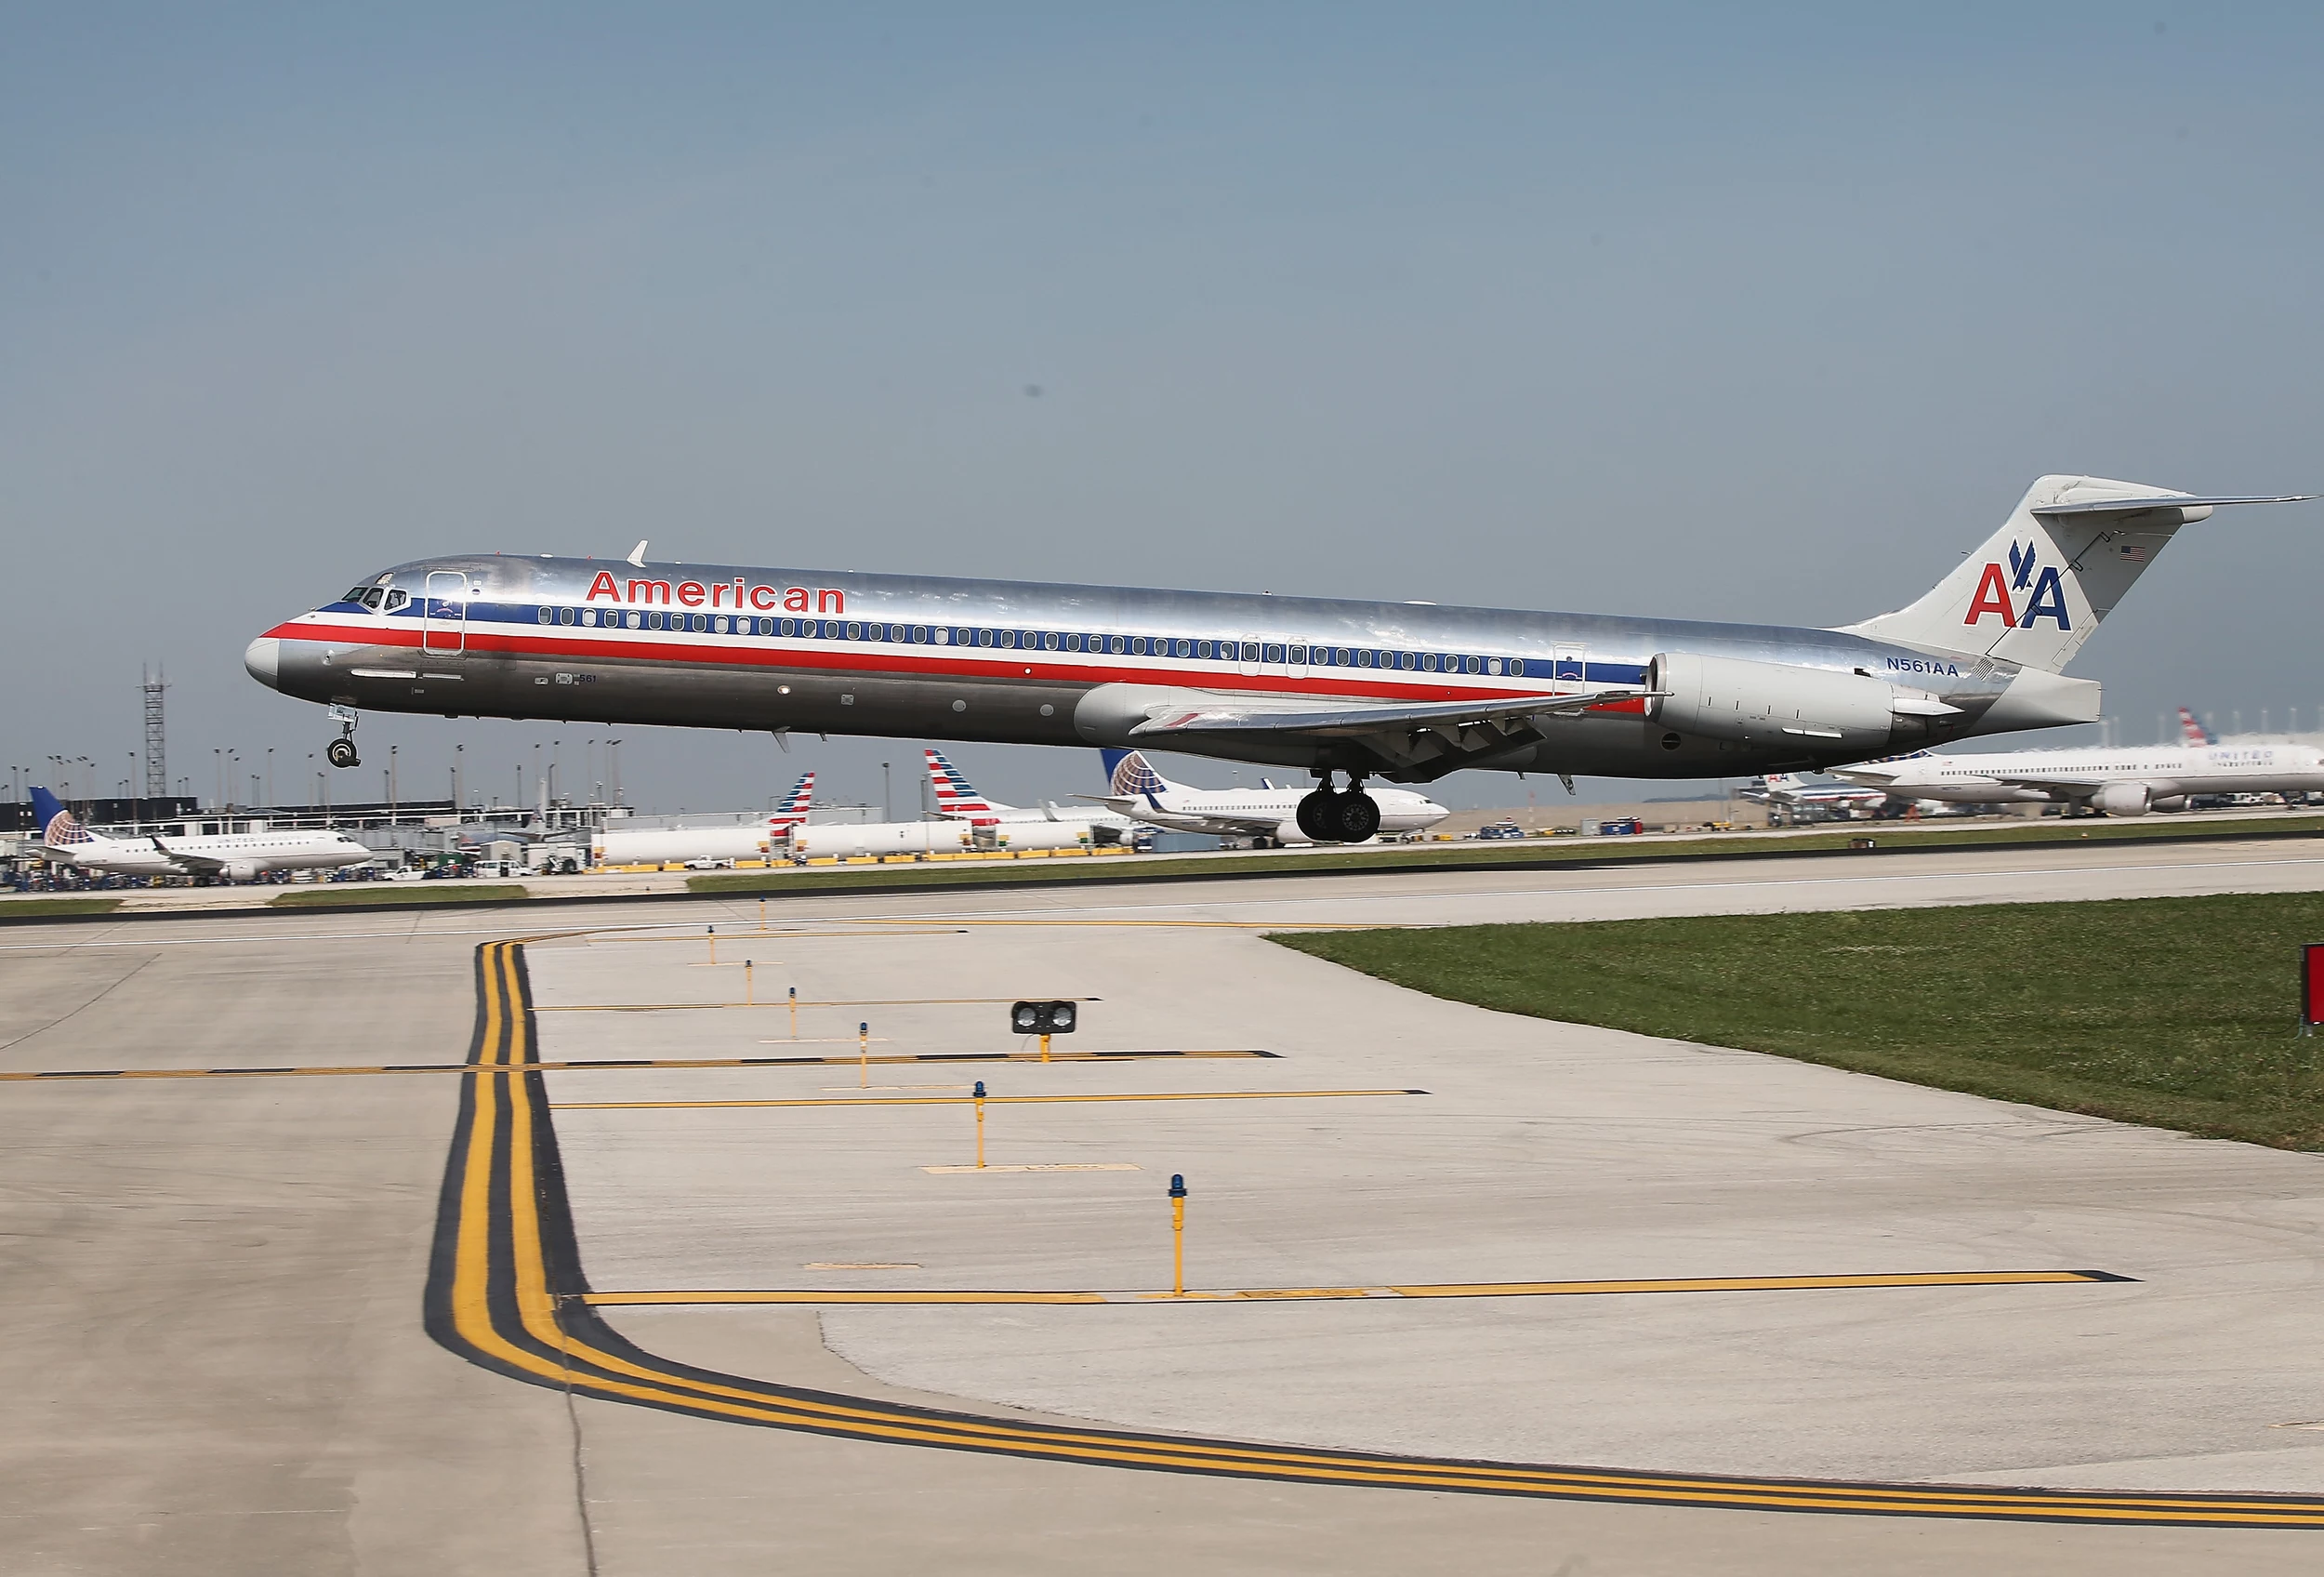 2600 American Airlines Plane Stock Photos Pictures  RoyaltyFree Images   iStock  American airlines plane takeoff